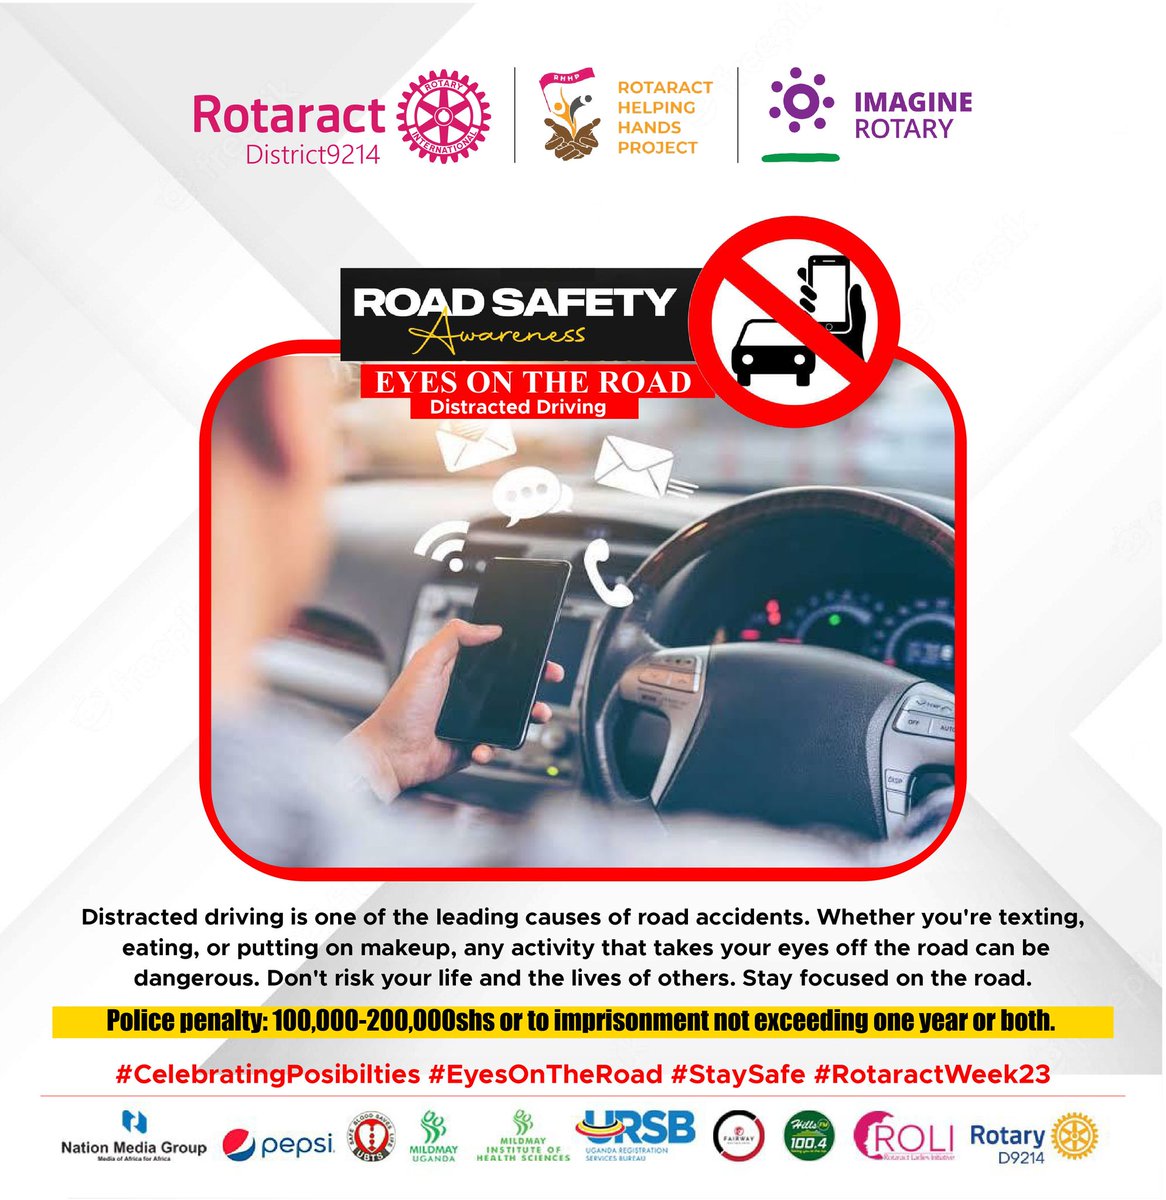 Keep your #EyesOnTheRoad! Do not engage in any distractions like texting, eating or even applying makeup while driving. Let's actively take part in keeping ourselves and other road users safe. #TheHardNats #CelebratingPossibilities #RotaractWeek23